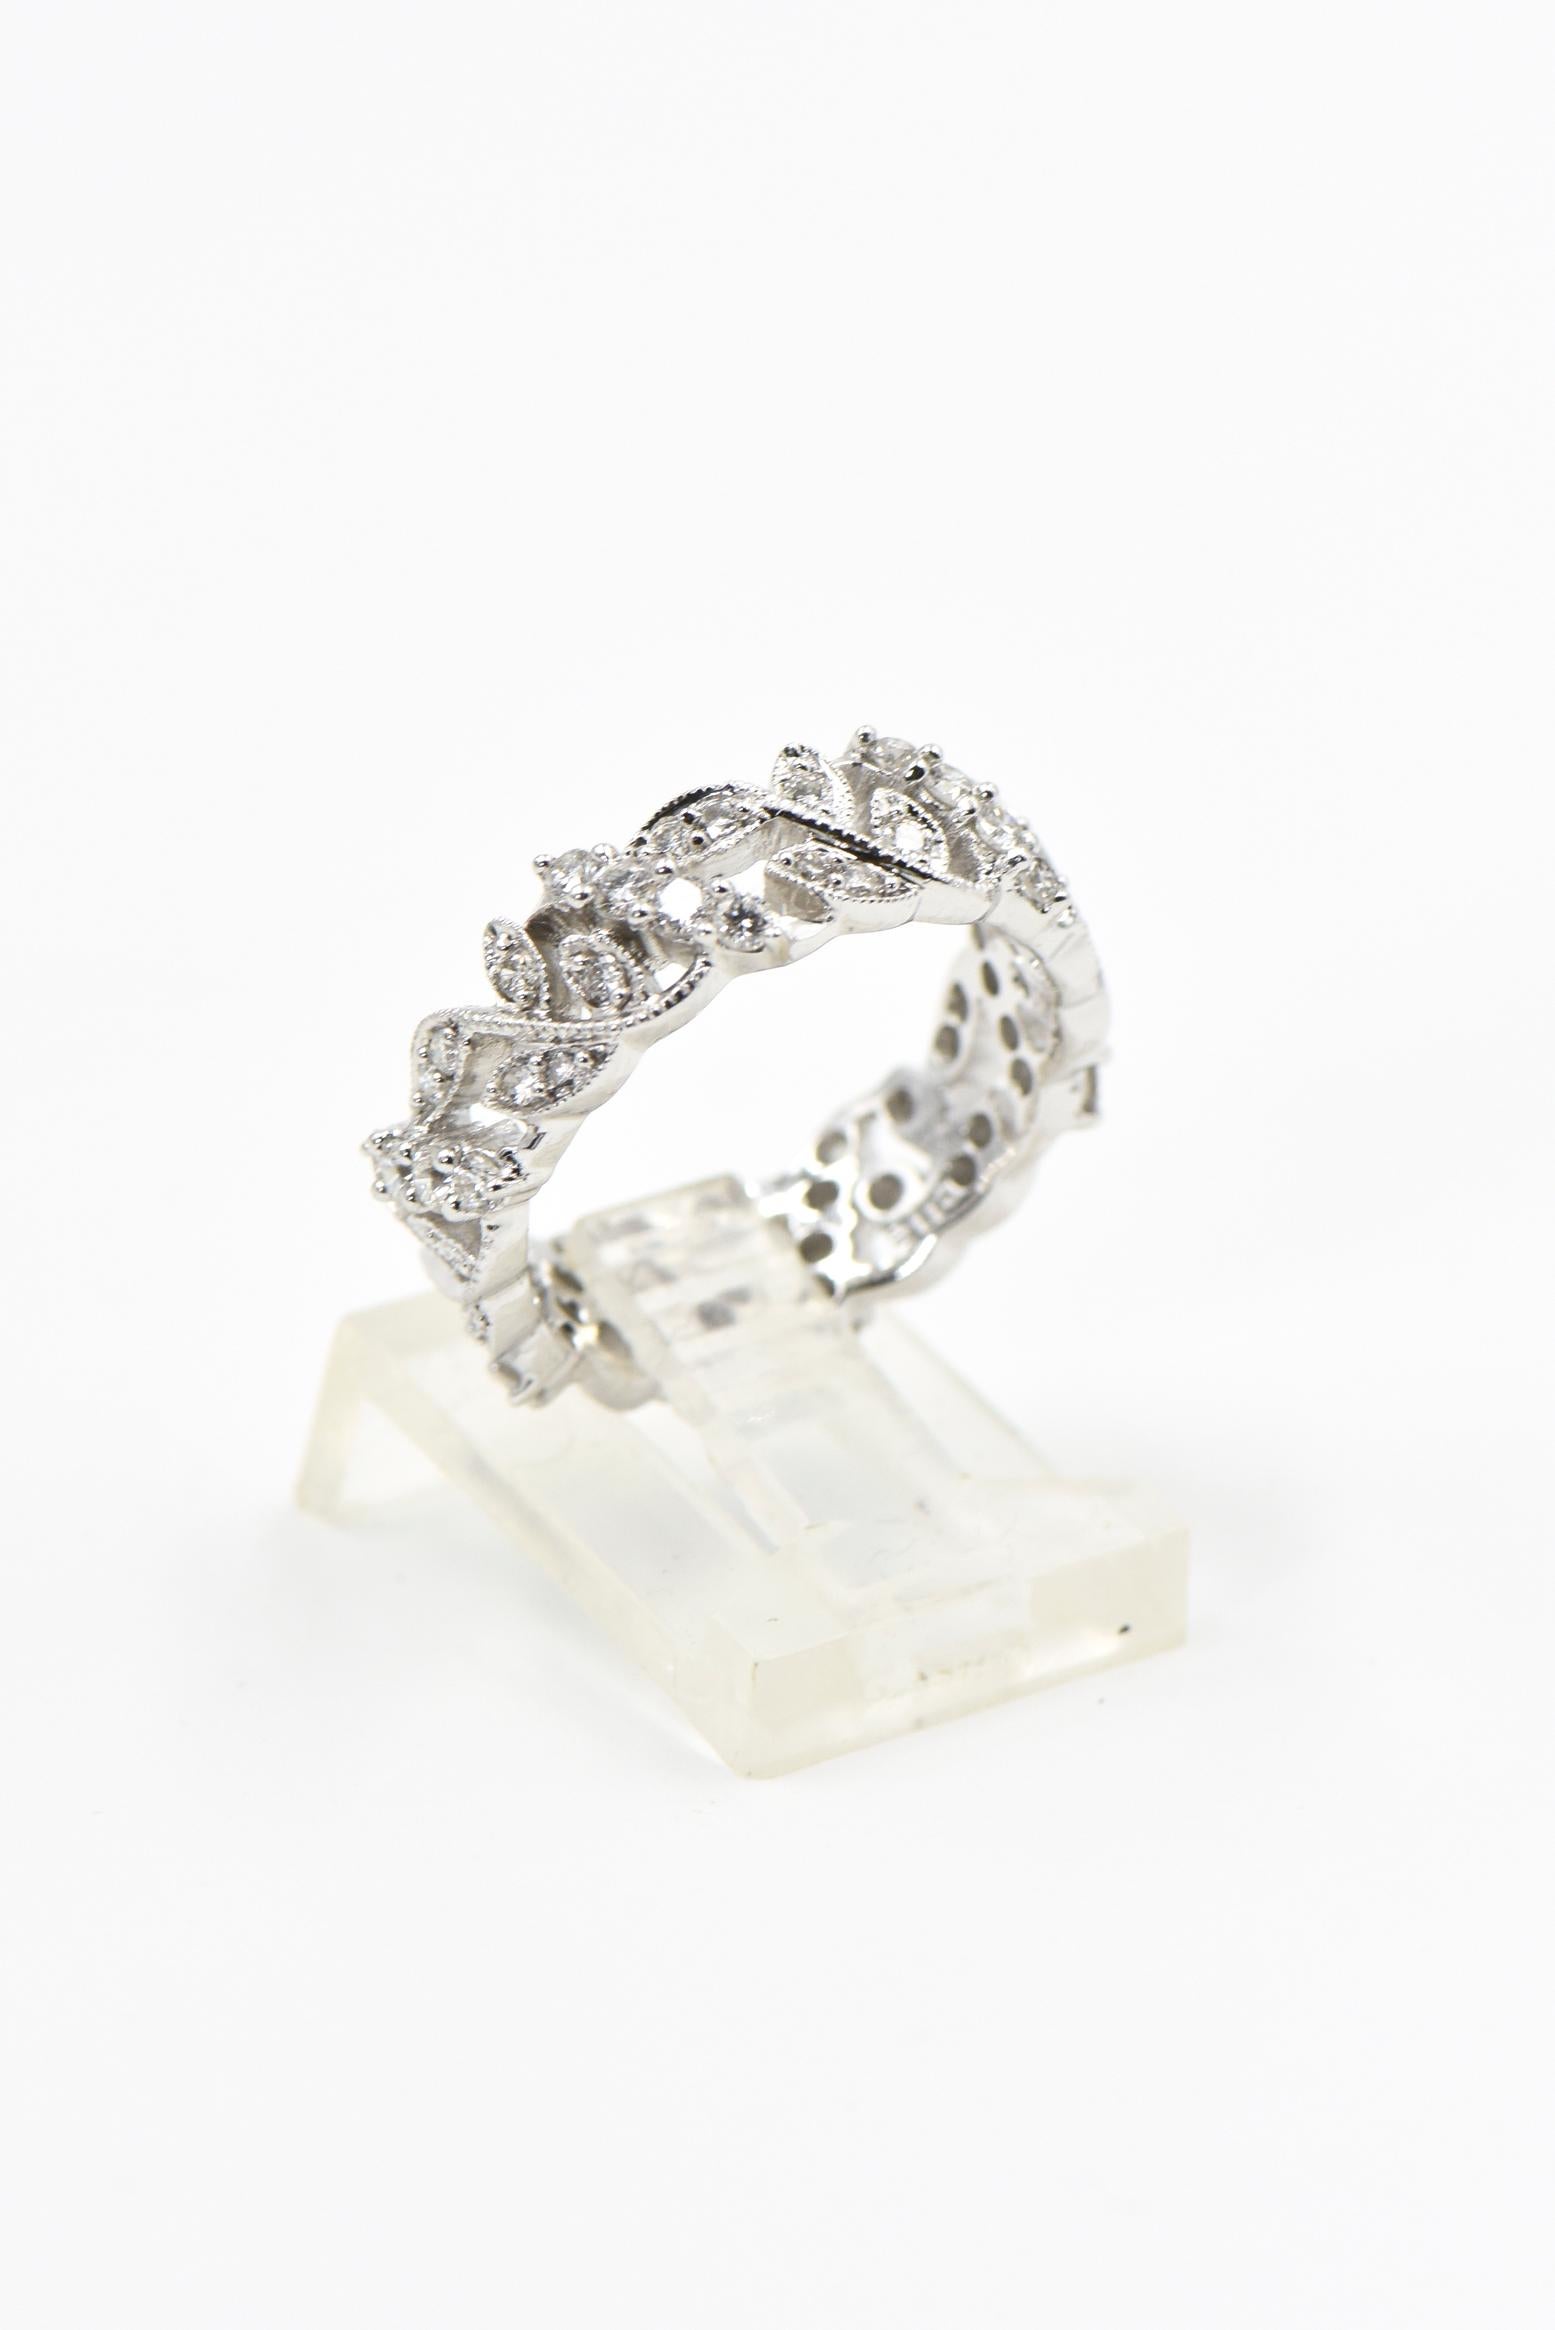 Beautiful 18k white gold eternity band featuring a vine with four leaves design alternating between a diagonal line of four prong set diamonds.  
The band is 6.43 mm wide. 
It is a US size 7.